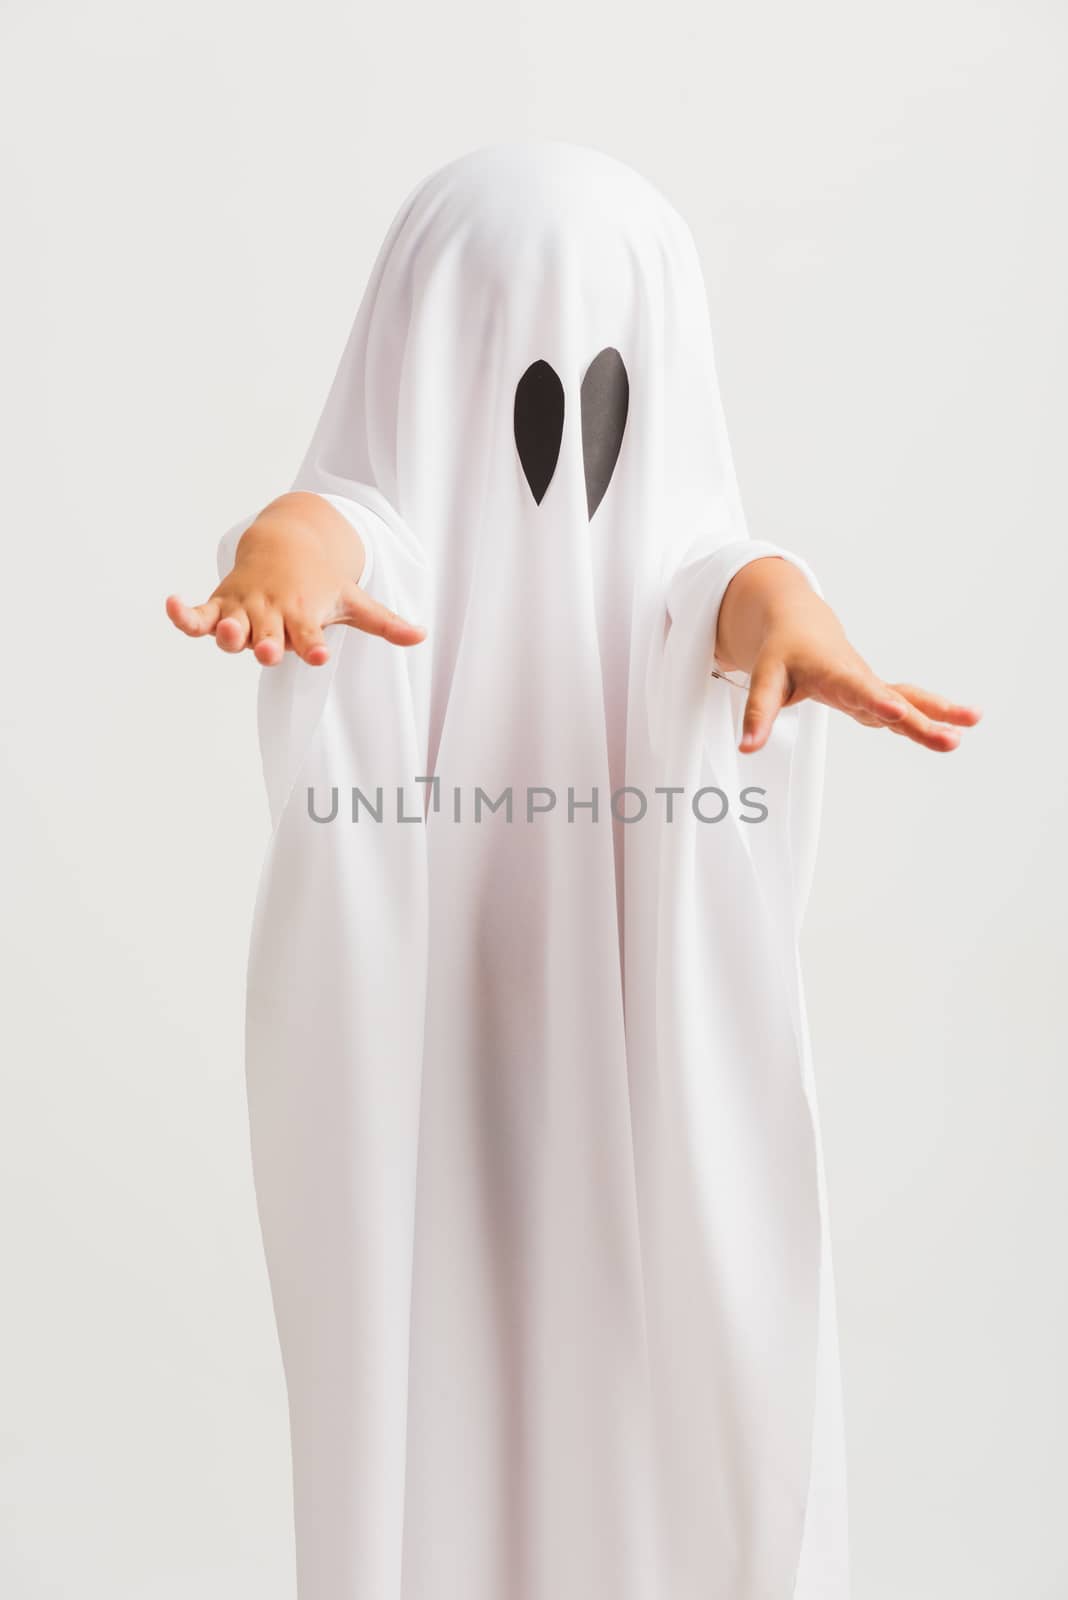 Funny Halloween Kid Concept, little cute child with white dressed costume halloween ghost scary, studio shot isolated on white background